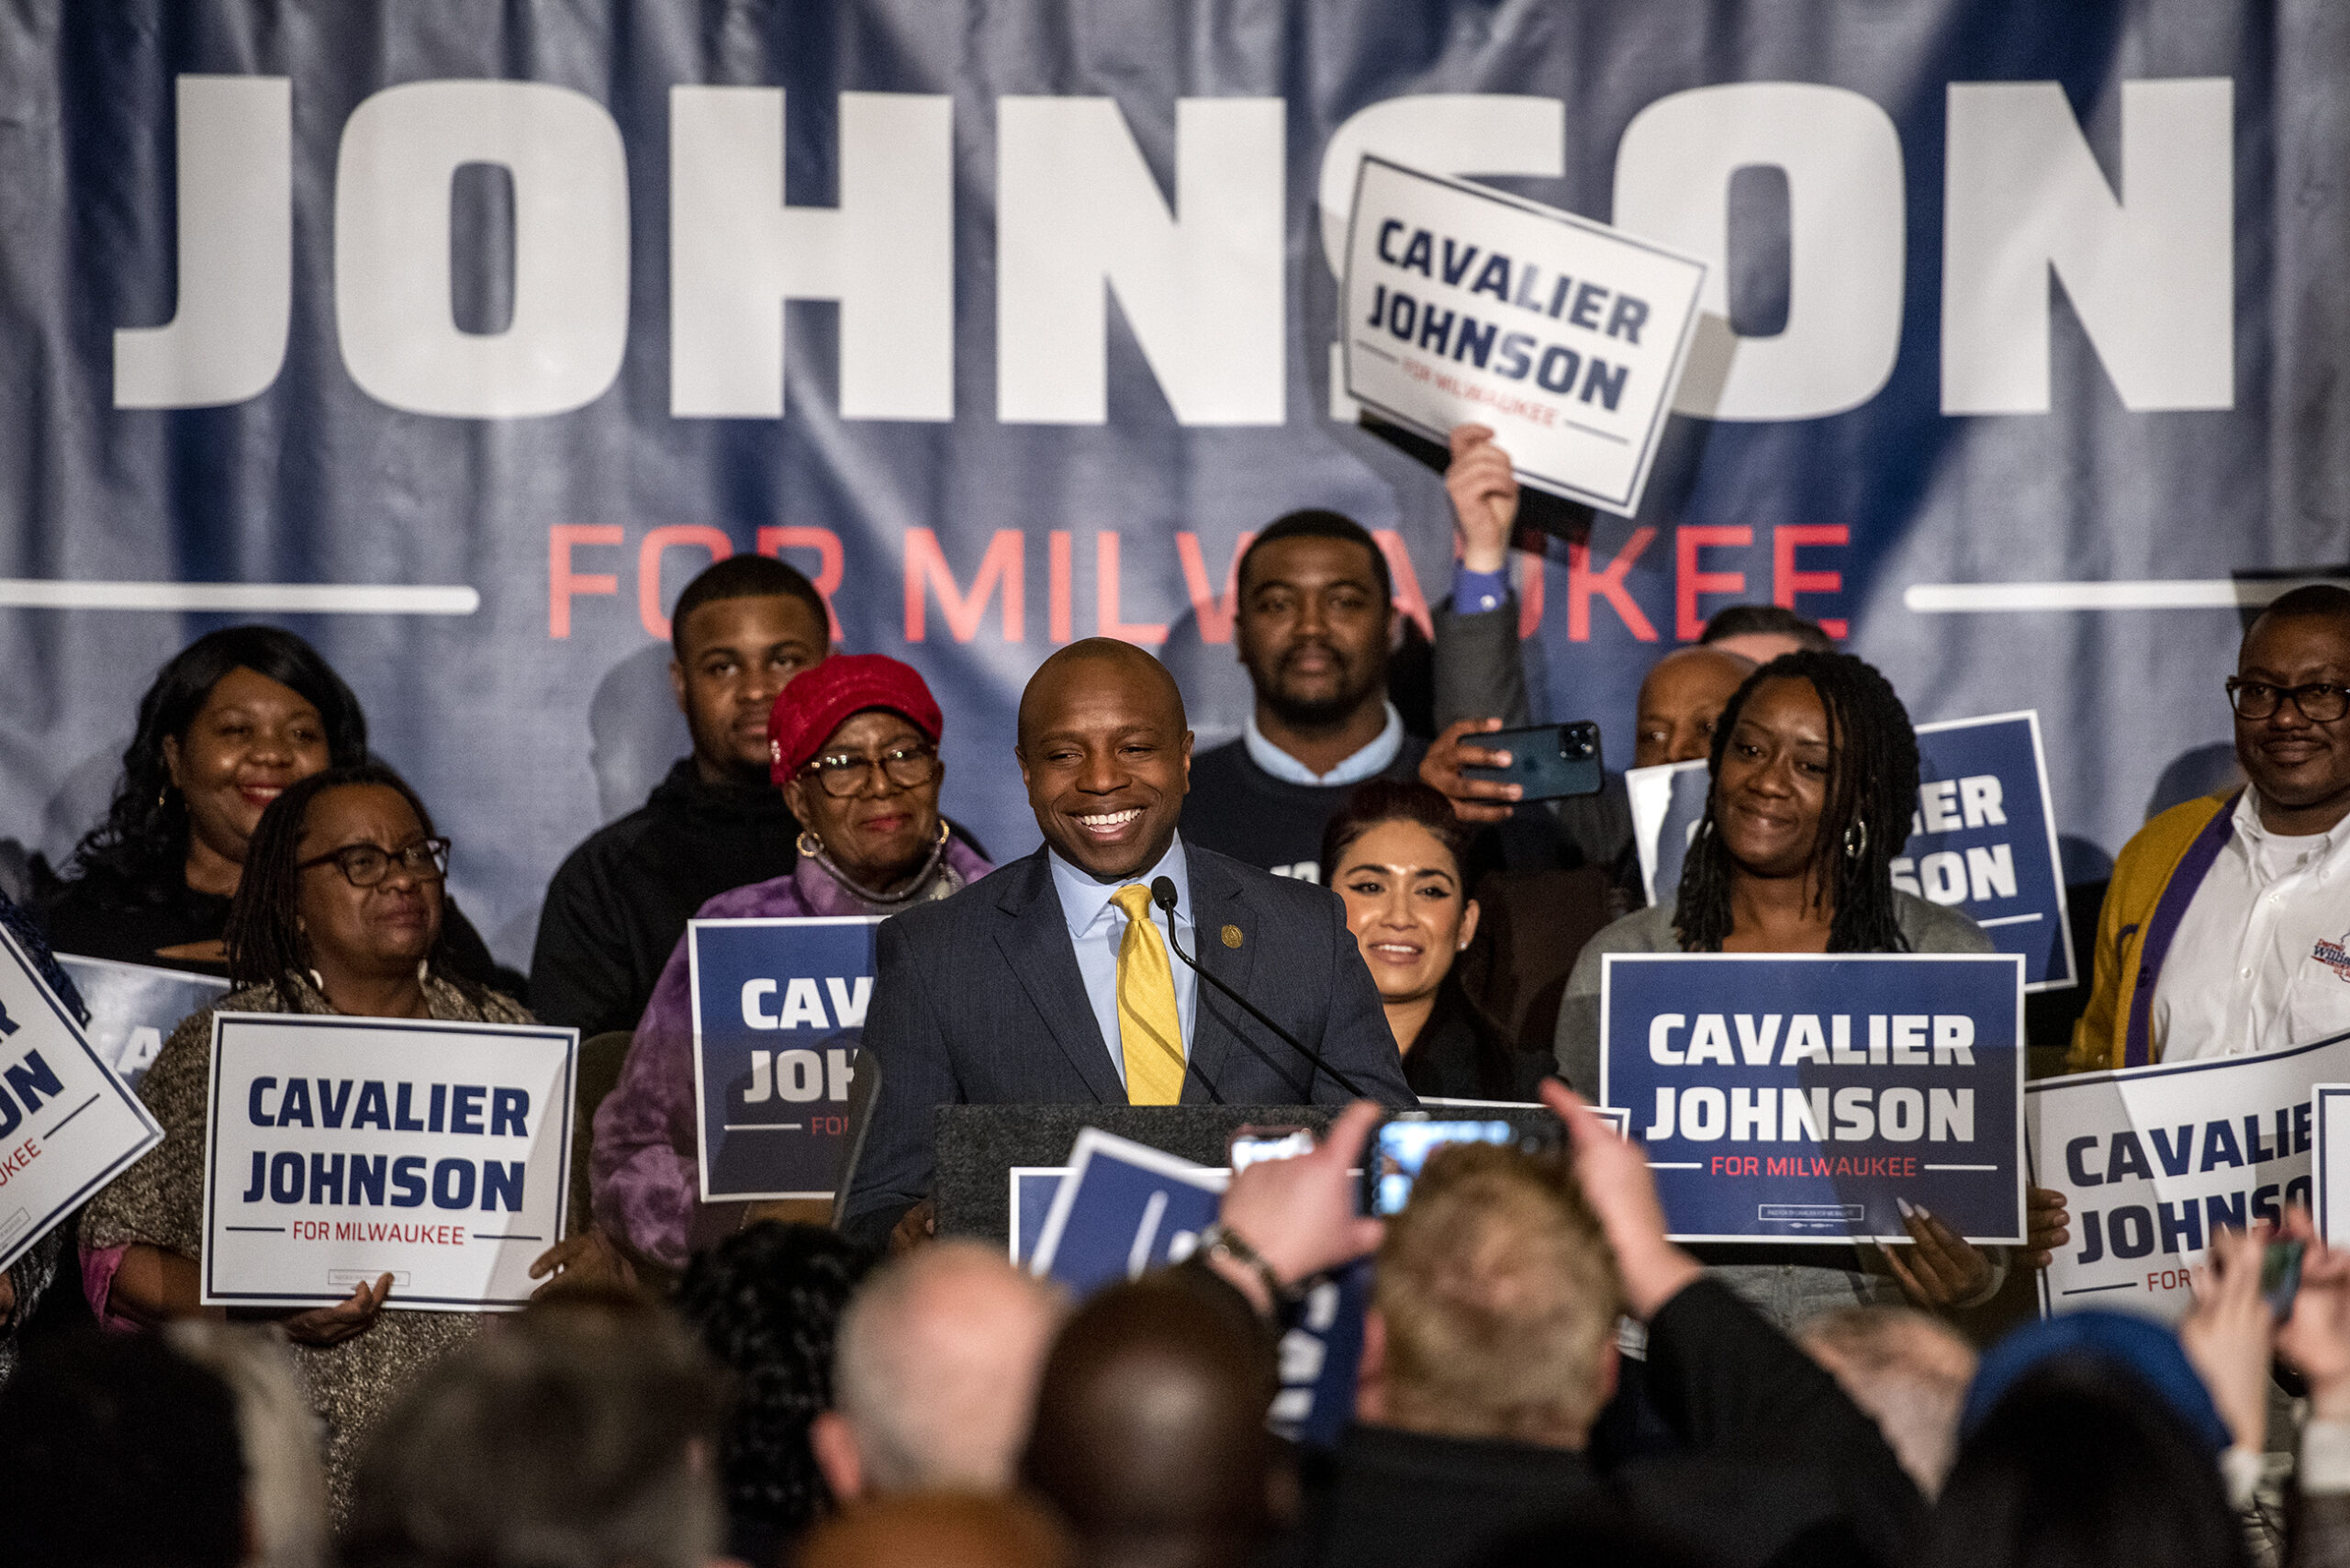 Supporters hold signs as Cavalier Johnson takes the stage.